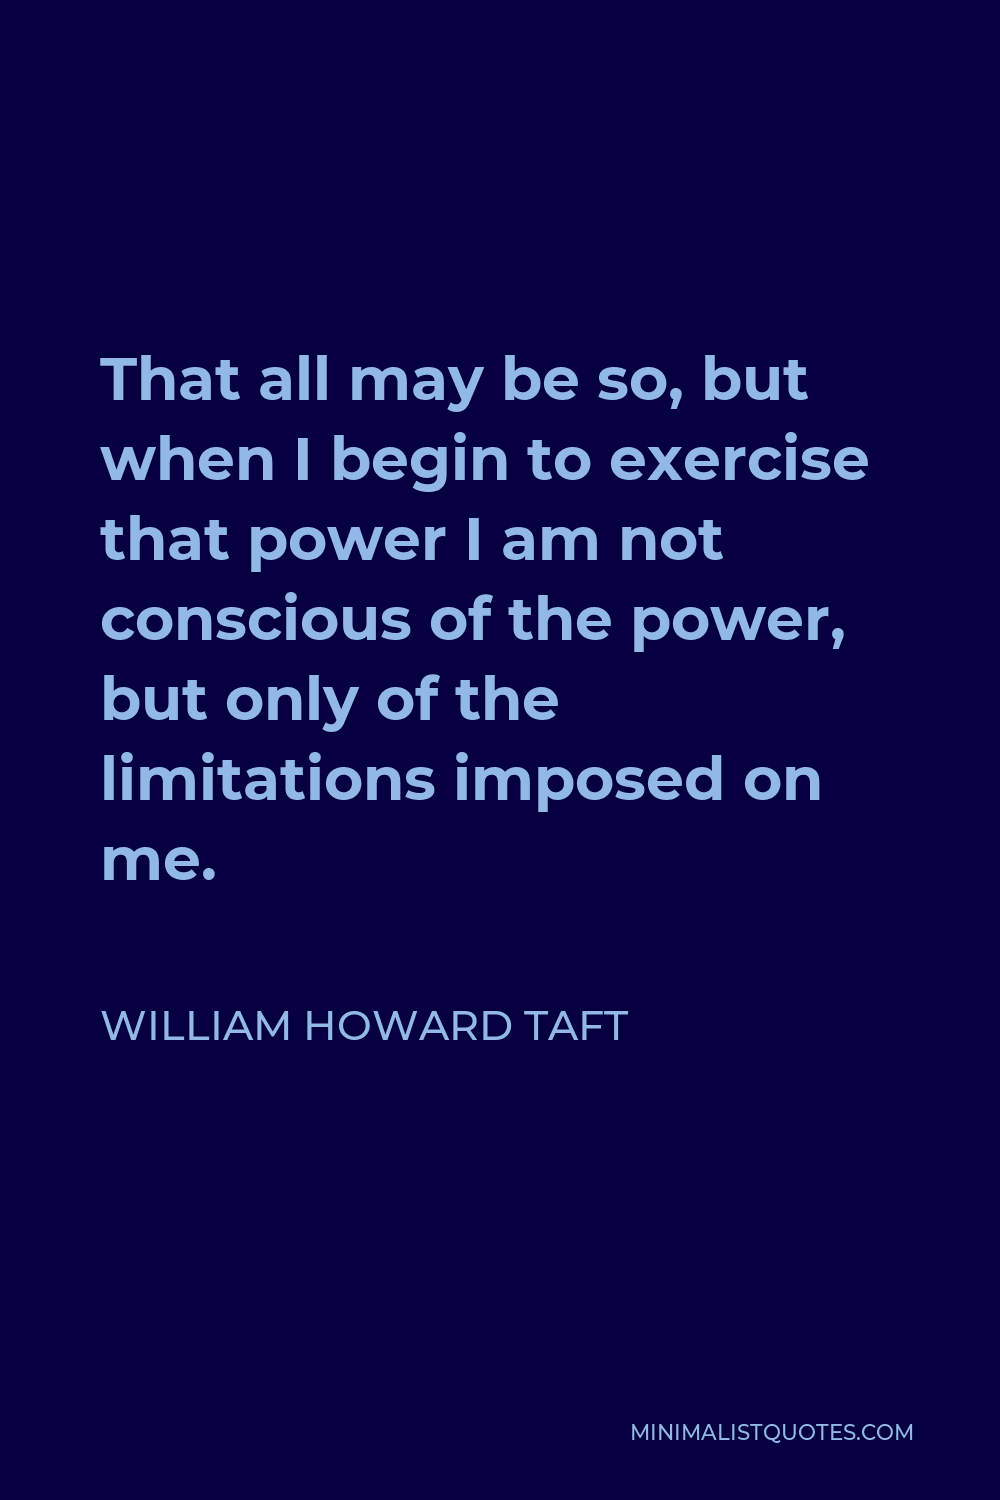 William Howard Taft Quote - That all may be so, but when I begin to exercise that power I am not conscious of the power, but only of the limitations imposed on me.